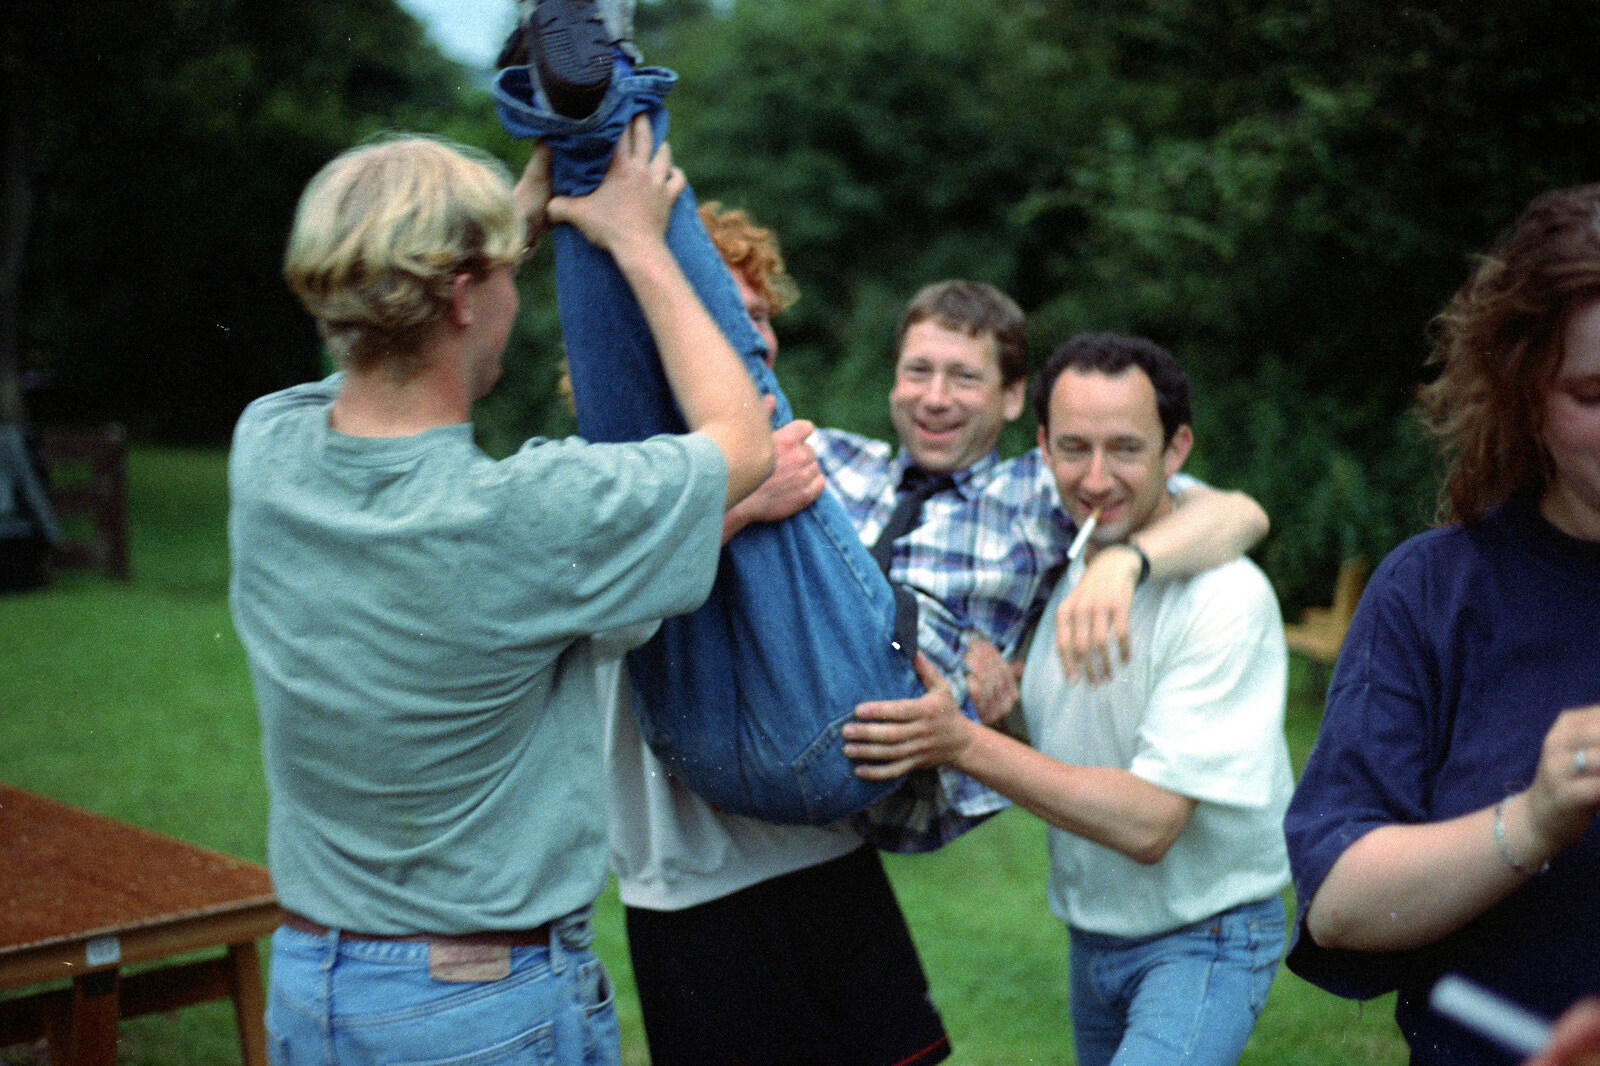 Apple is hauled off from DH's Barbeque at The Swan Inn, Brome, Suffolk - July 14th 1996